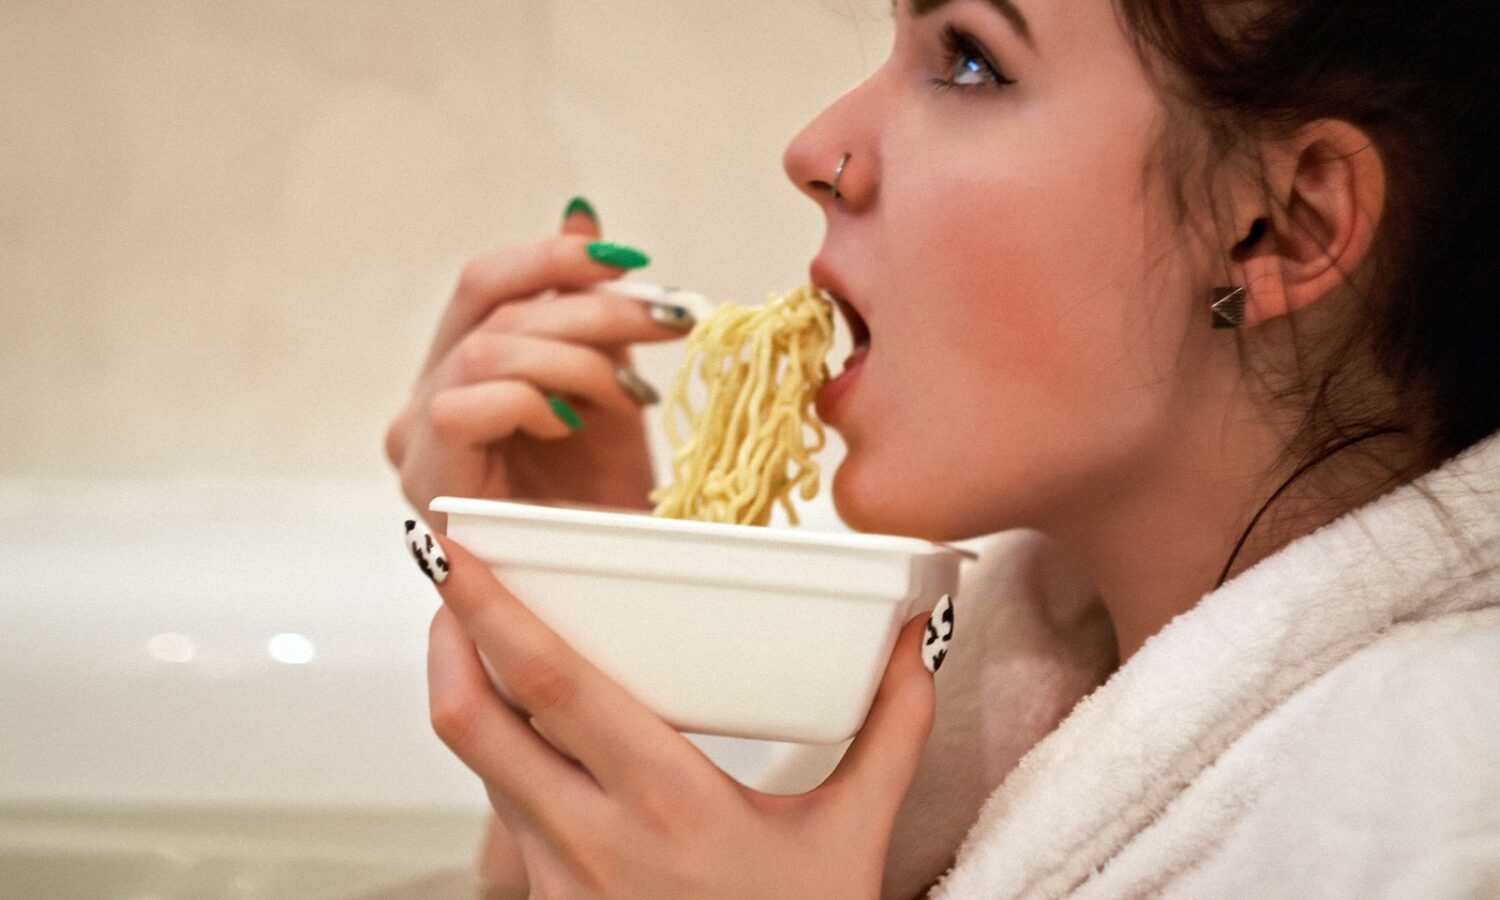 eating ultra processed foods has this weird effect on your brain e1659485069303 682369